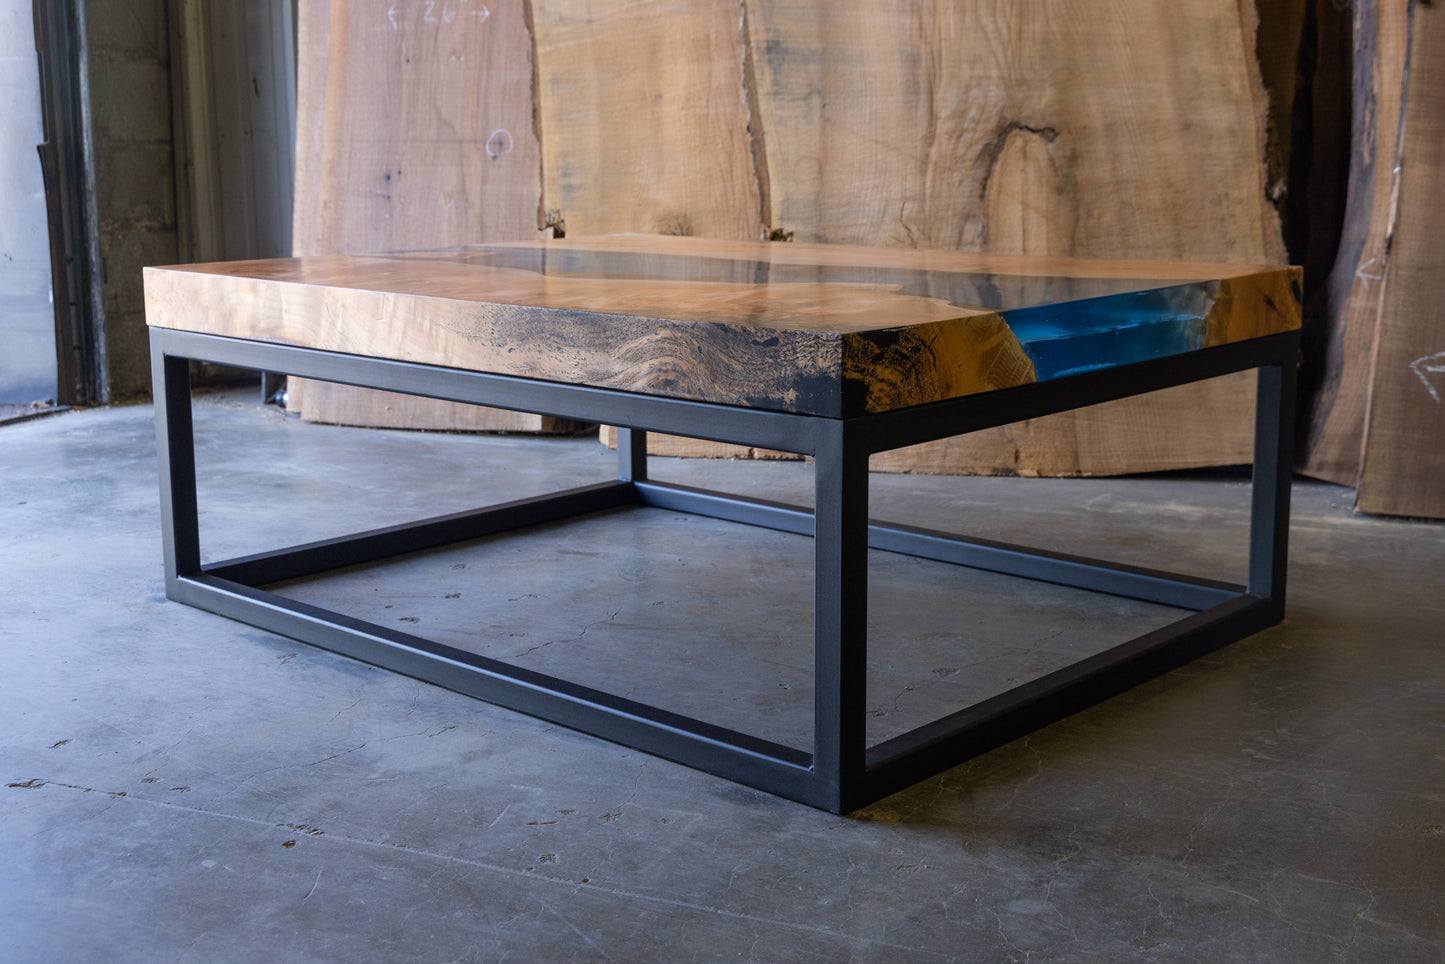 Willow Epoxy "River" Coffee Table